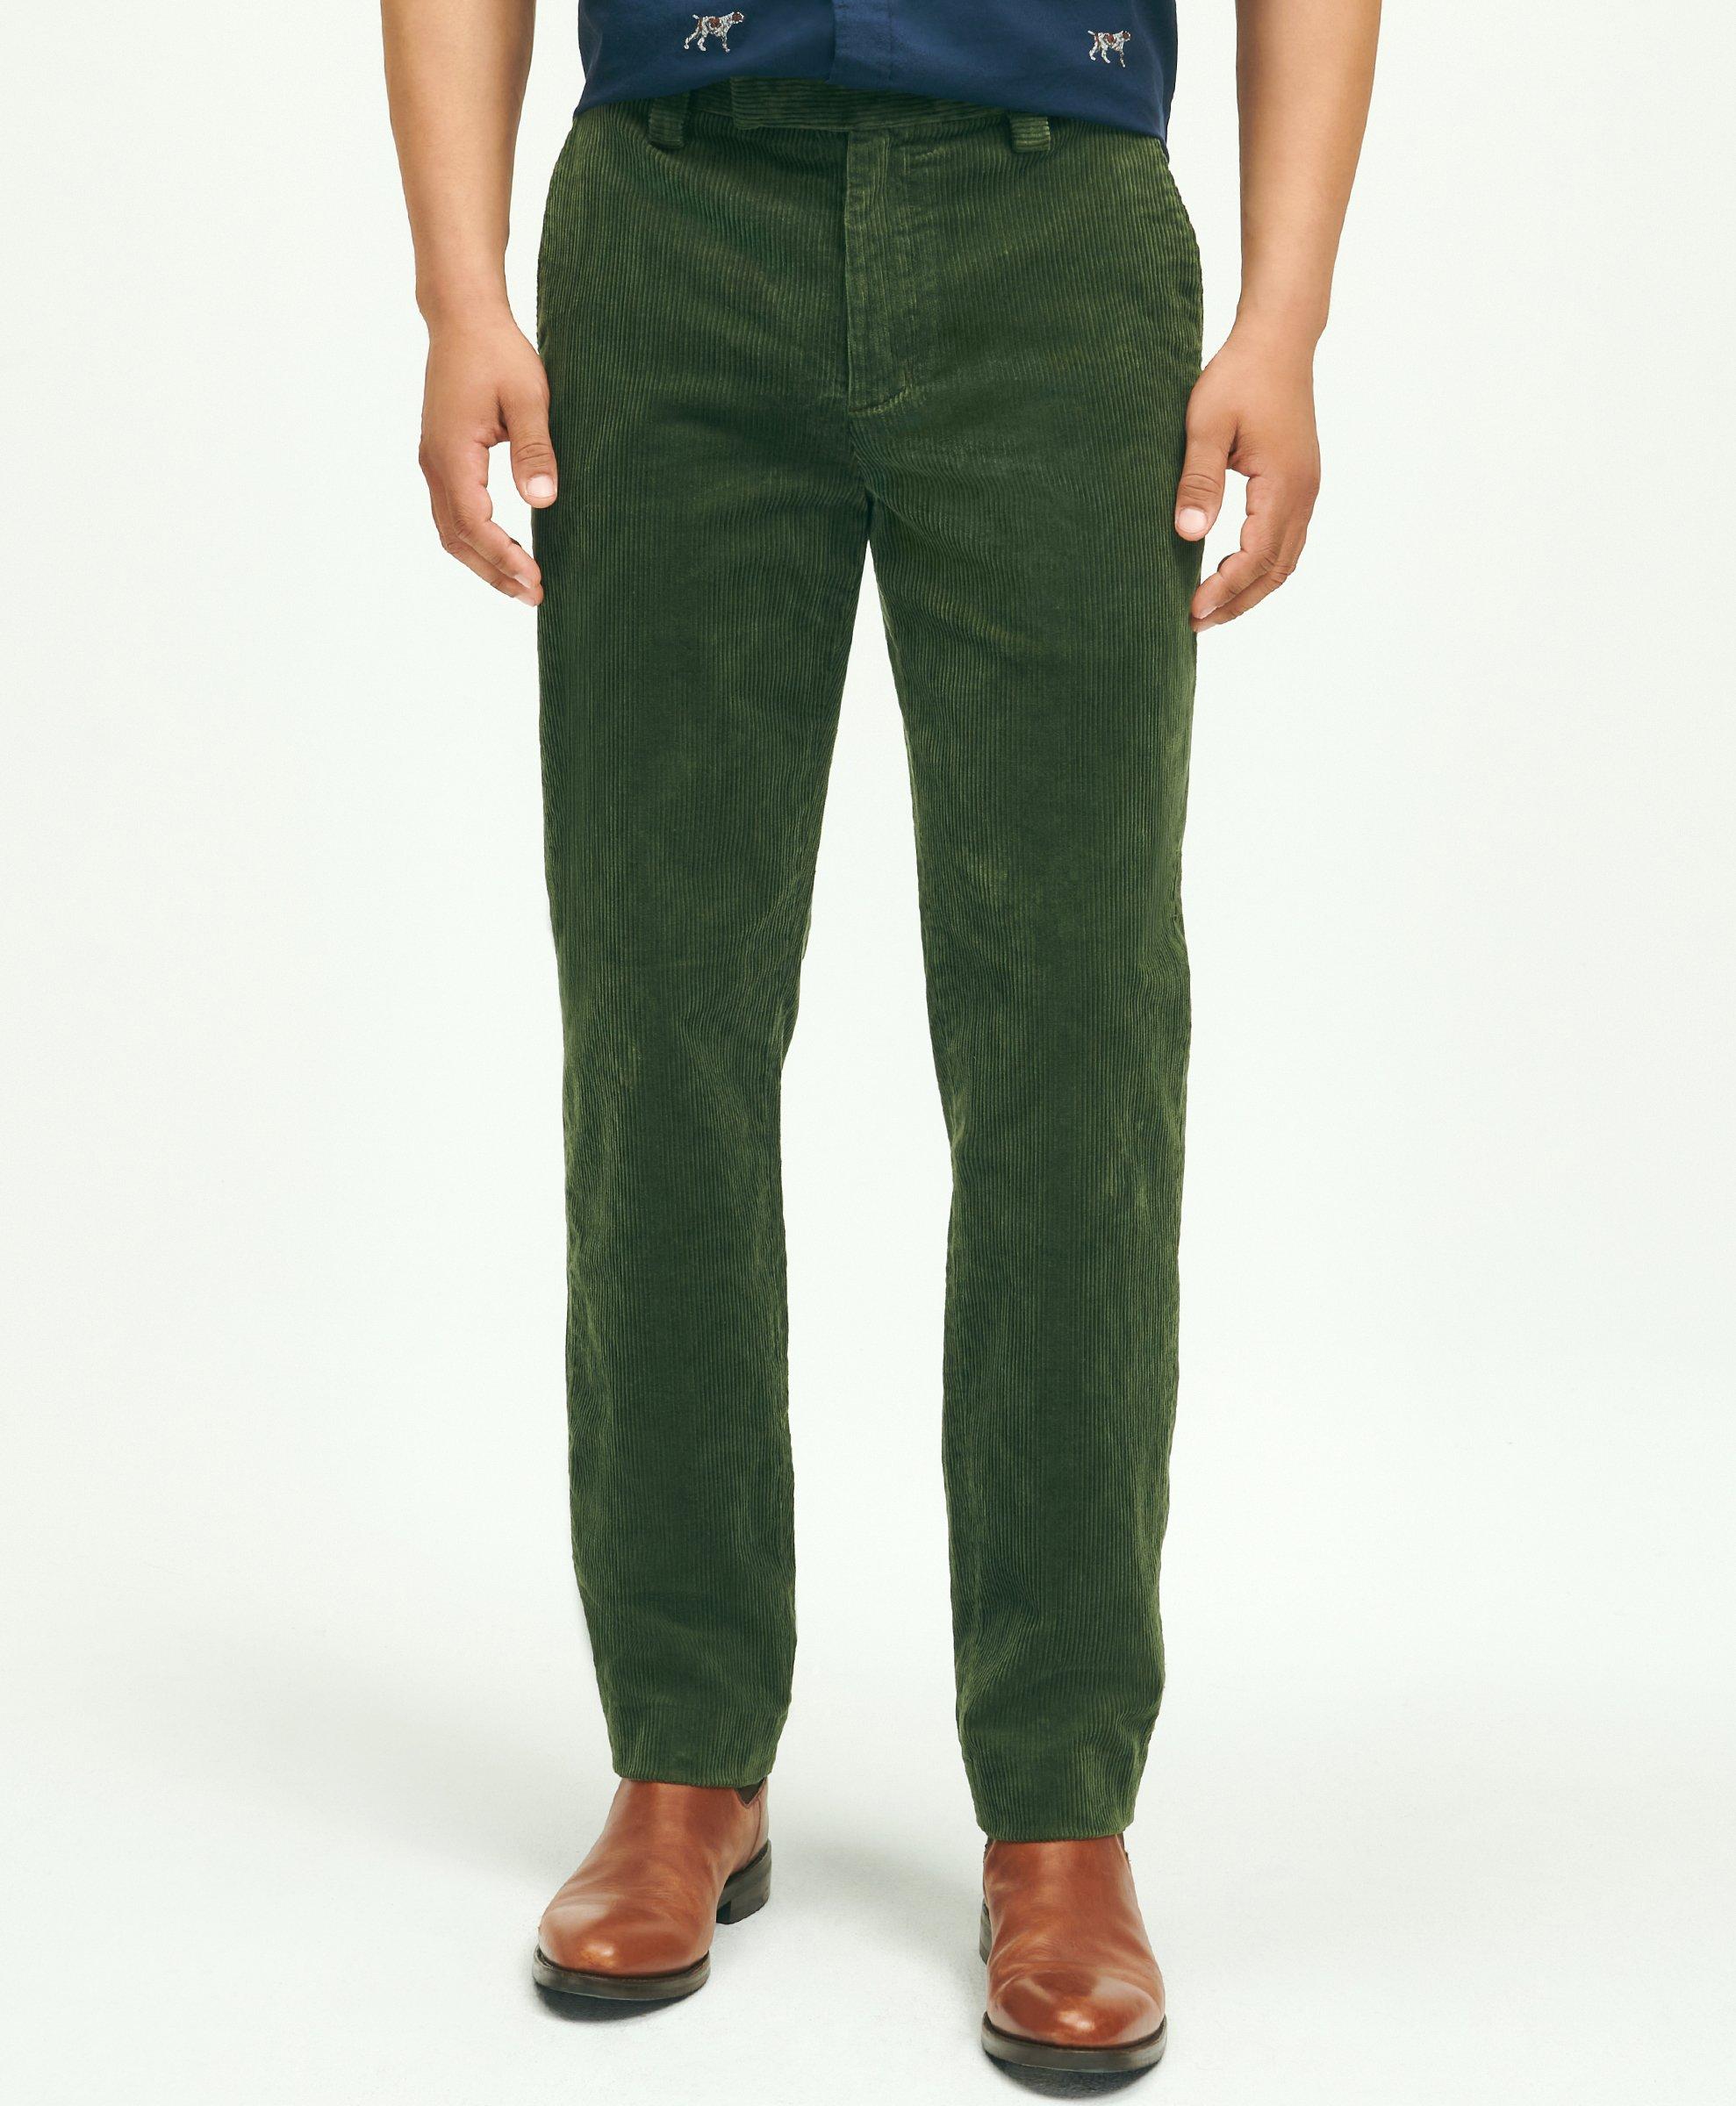 Brooks Brothers Slim Fit Cotton Wide-wale Corduroy Pants | Dark Green | Size 36 30